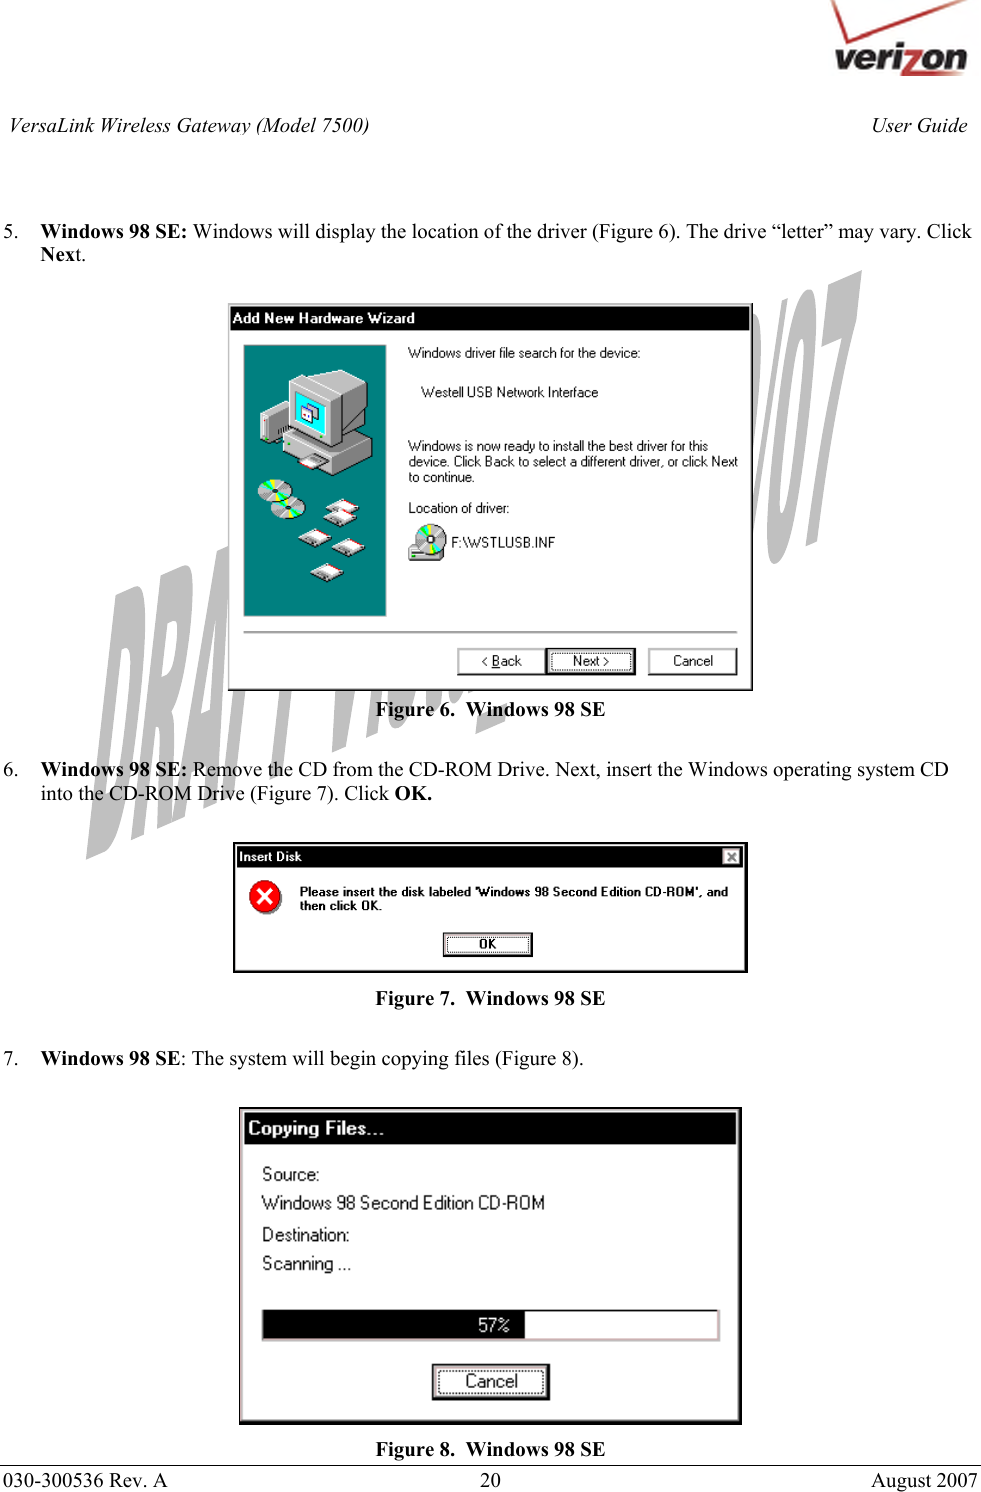       030-300536 Rev. A  20       August 2007 User GuideVersaLink Wireless Gateway (Model 7500)   5. Windows 98 SE: Windows will display the location of the driver (Figure 6). The drive “letter” may vary. Click Next.   Figure 6.  Windows 98 SE  6. Windows 98 SE: Remove the CD from the CD-ROM Drive. Next, insert the Windows operating system CD into the CD-ROM Drive (Figure 7). Click OK.   Figure 7.  Windows 98 SE  7. Windows 98 SE: The system will begin copying files (Figure 8).   Figure 8.  Windows 98 SE 